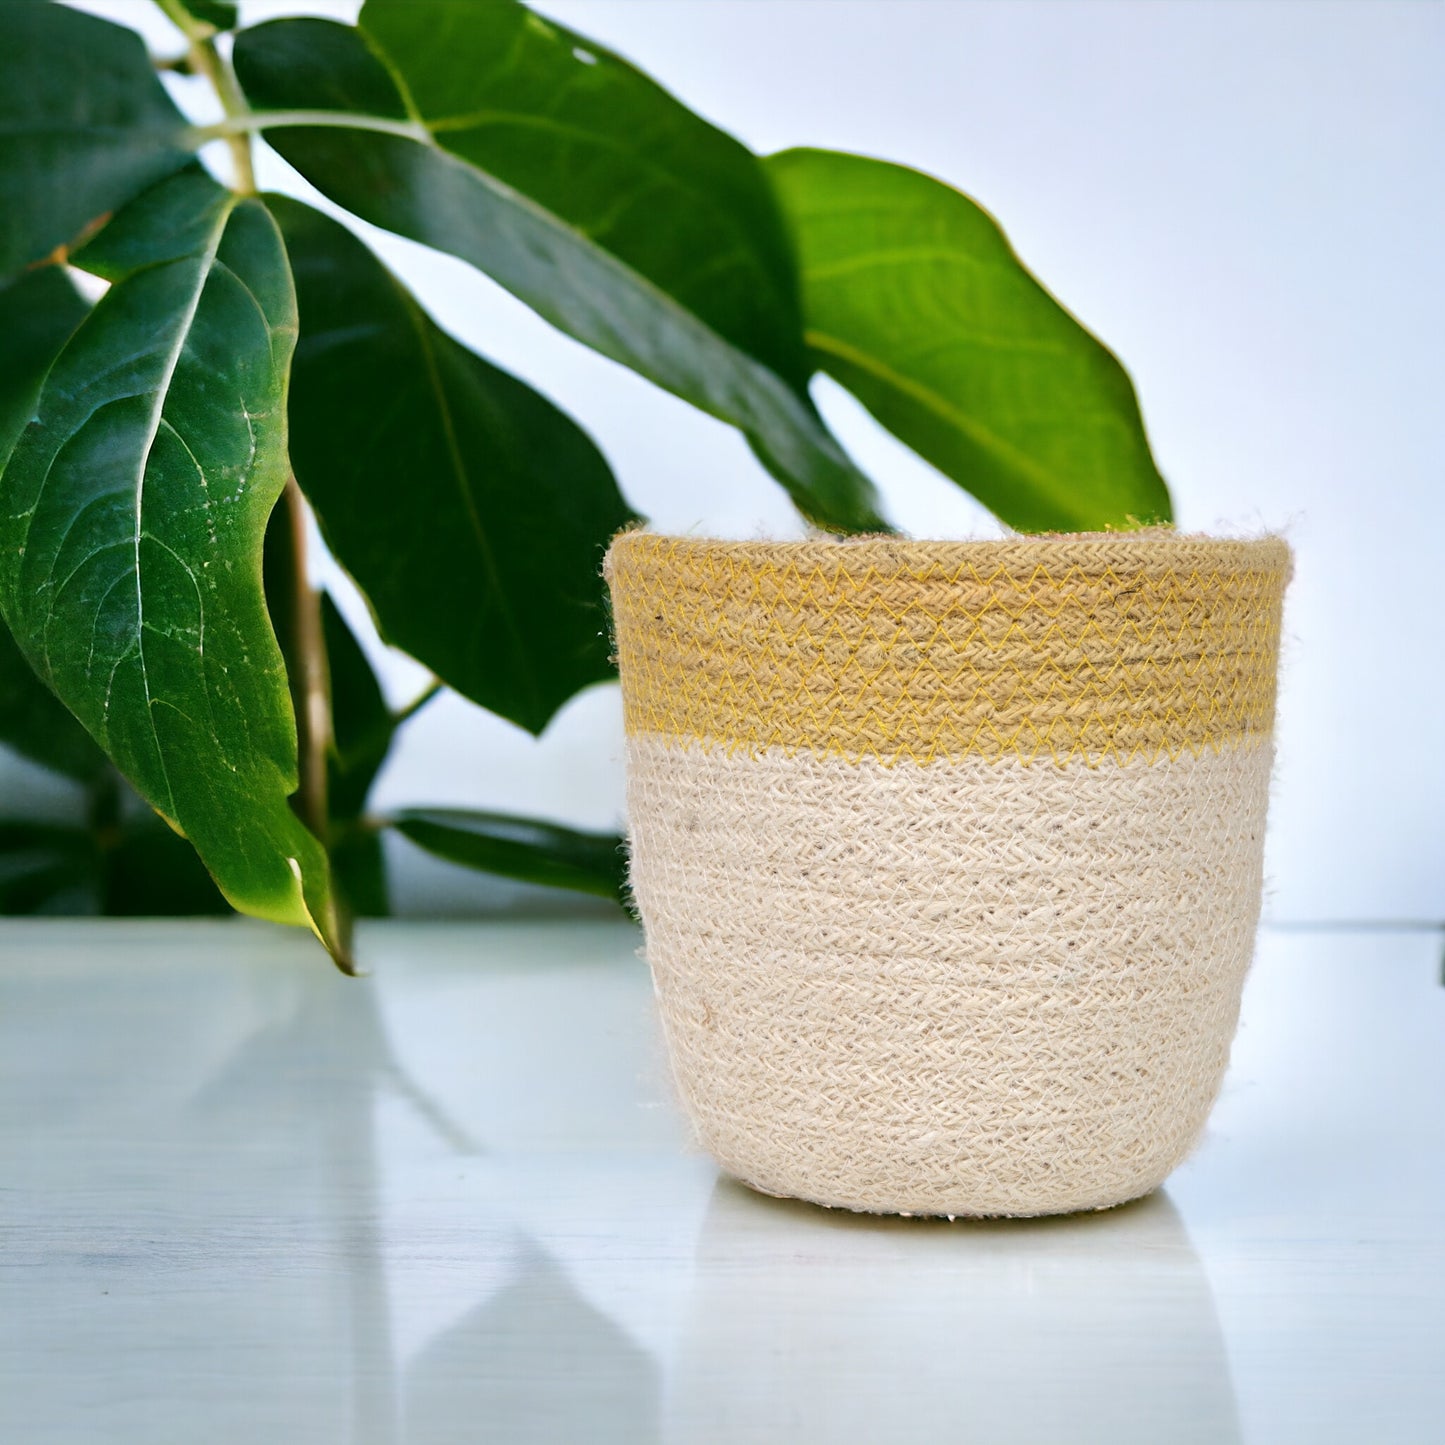 Jute basket on shiny white counter with leafy green plant 